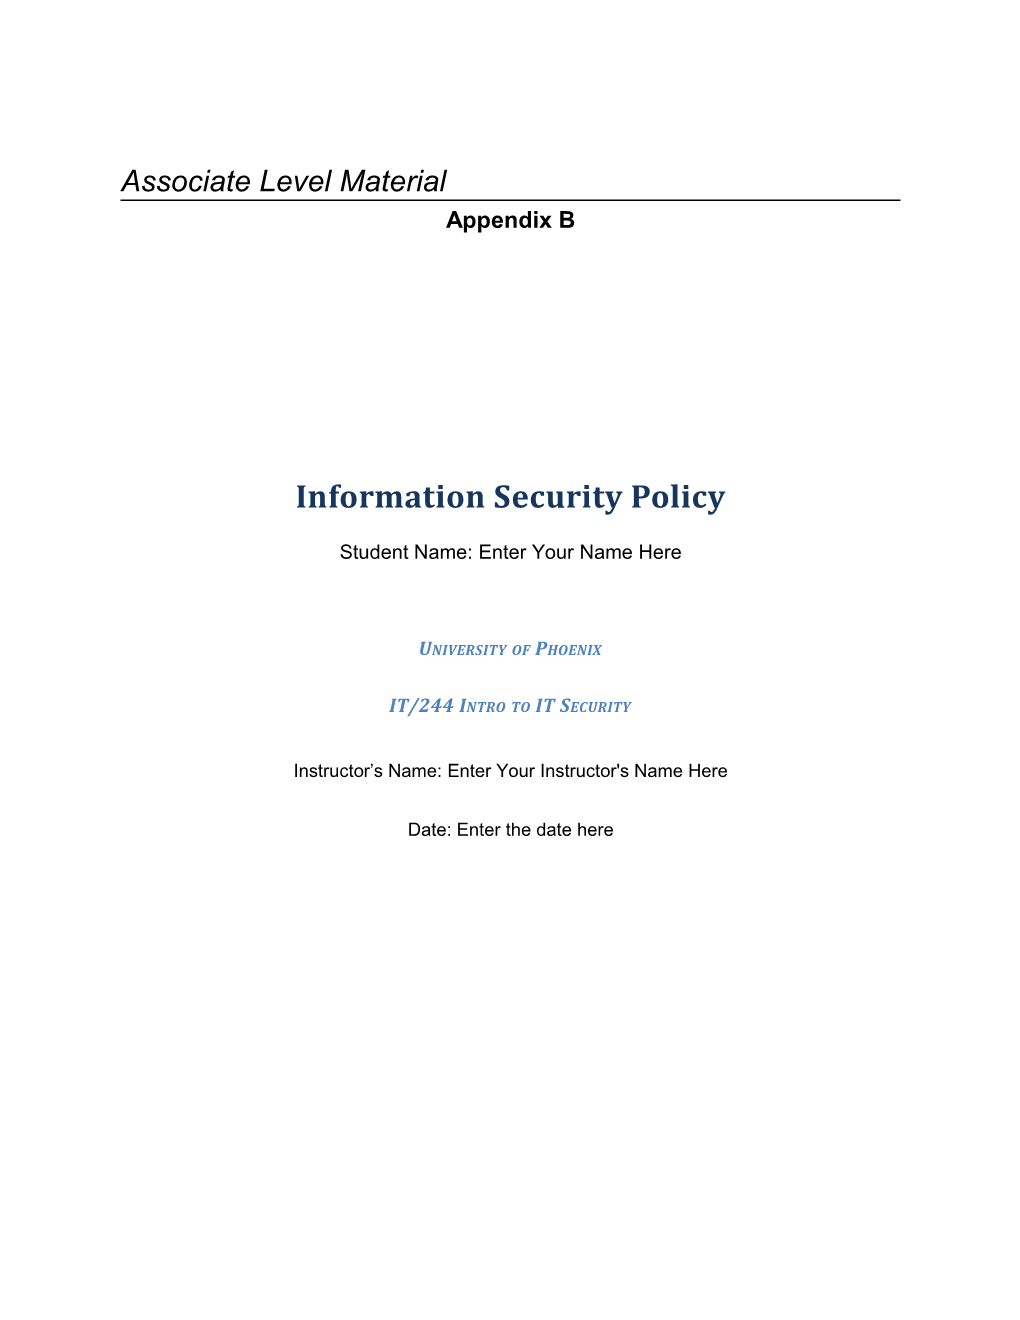 IT/244 Information Security Policy